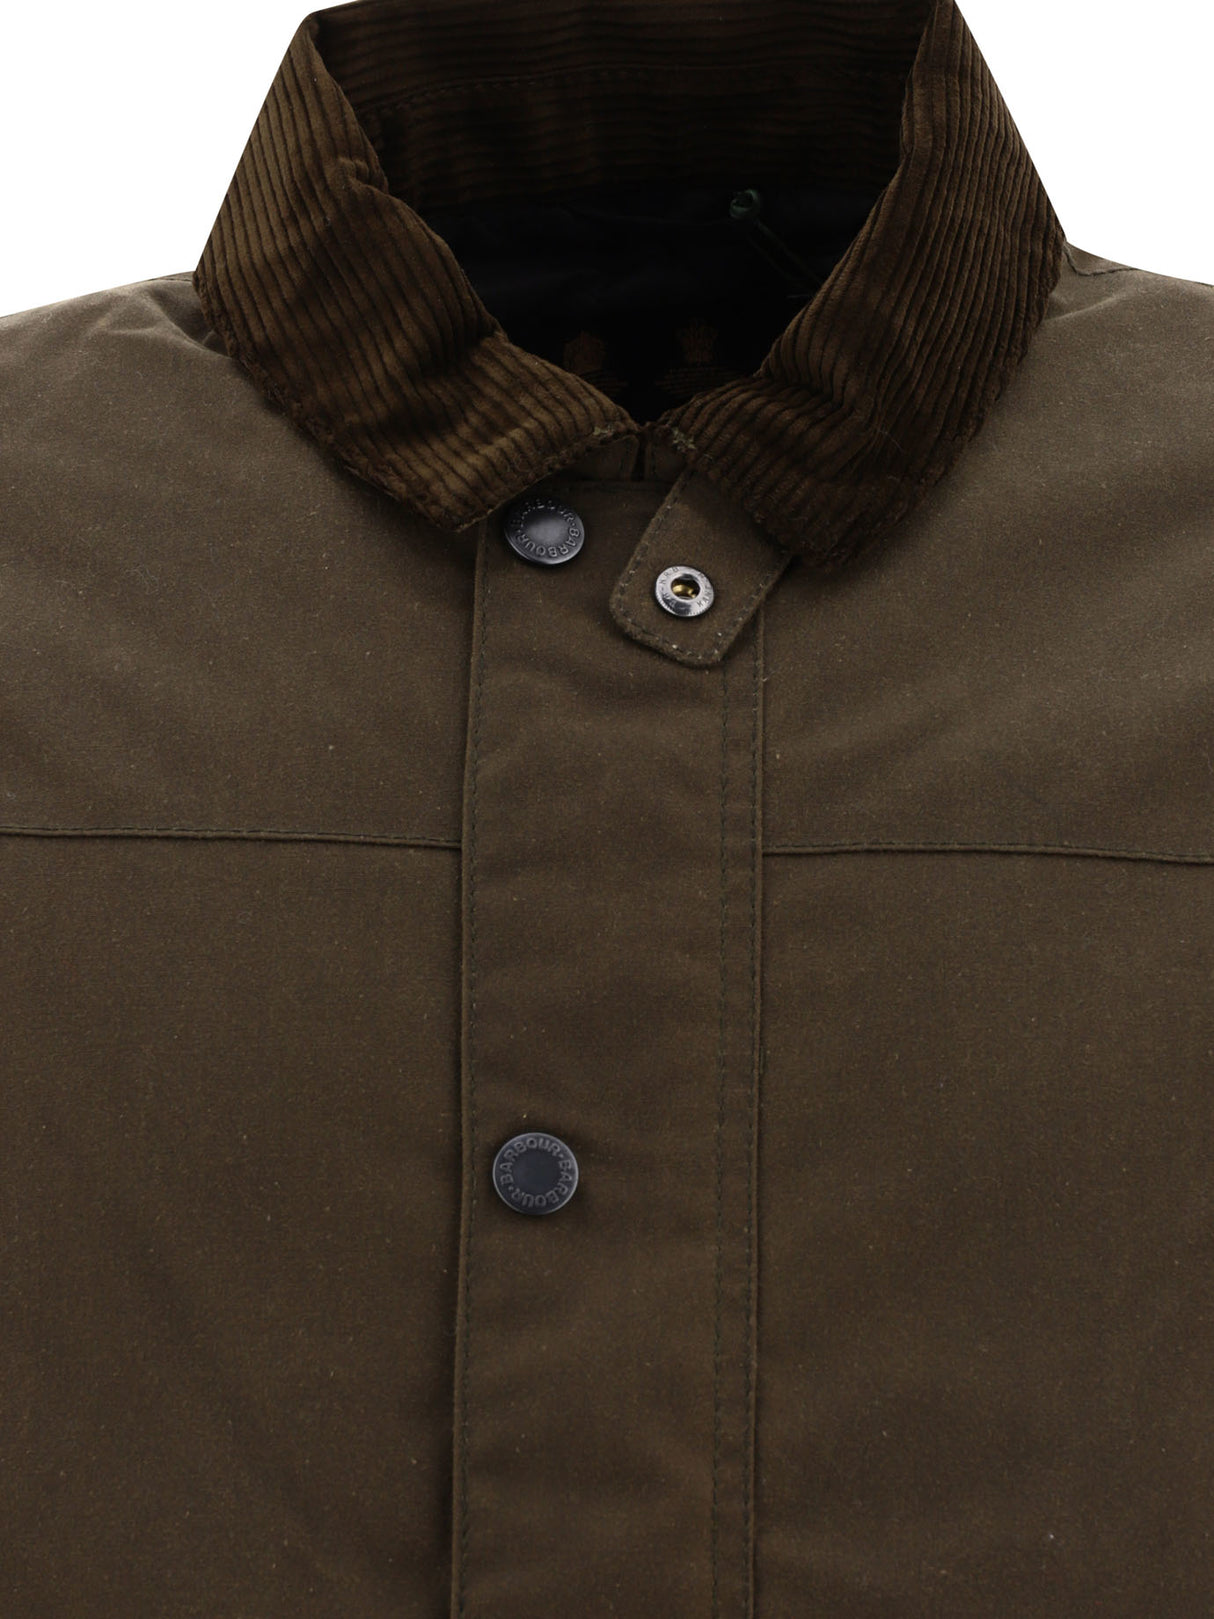 BARBOUR Green Waxed Jacket for Men - FW23 Collection